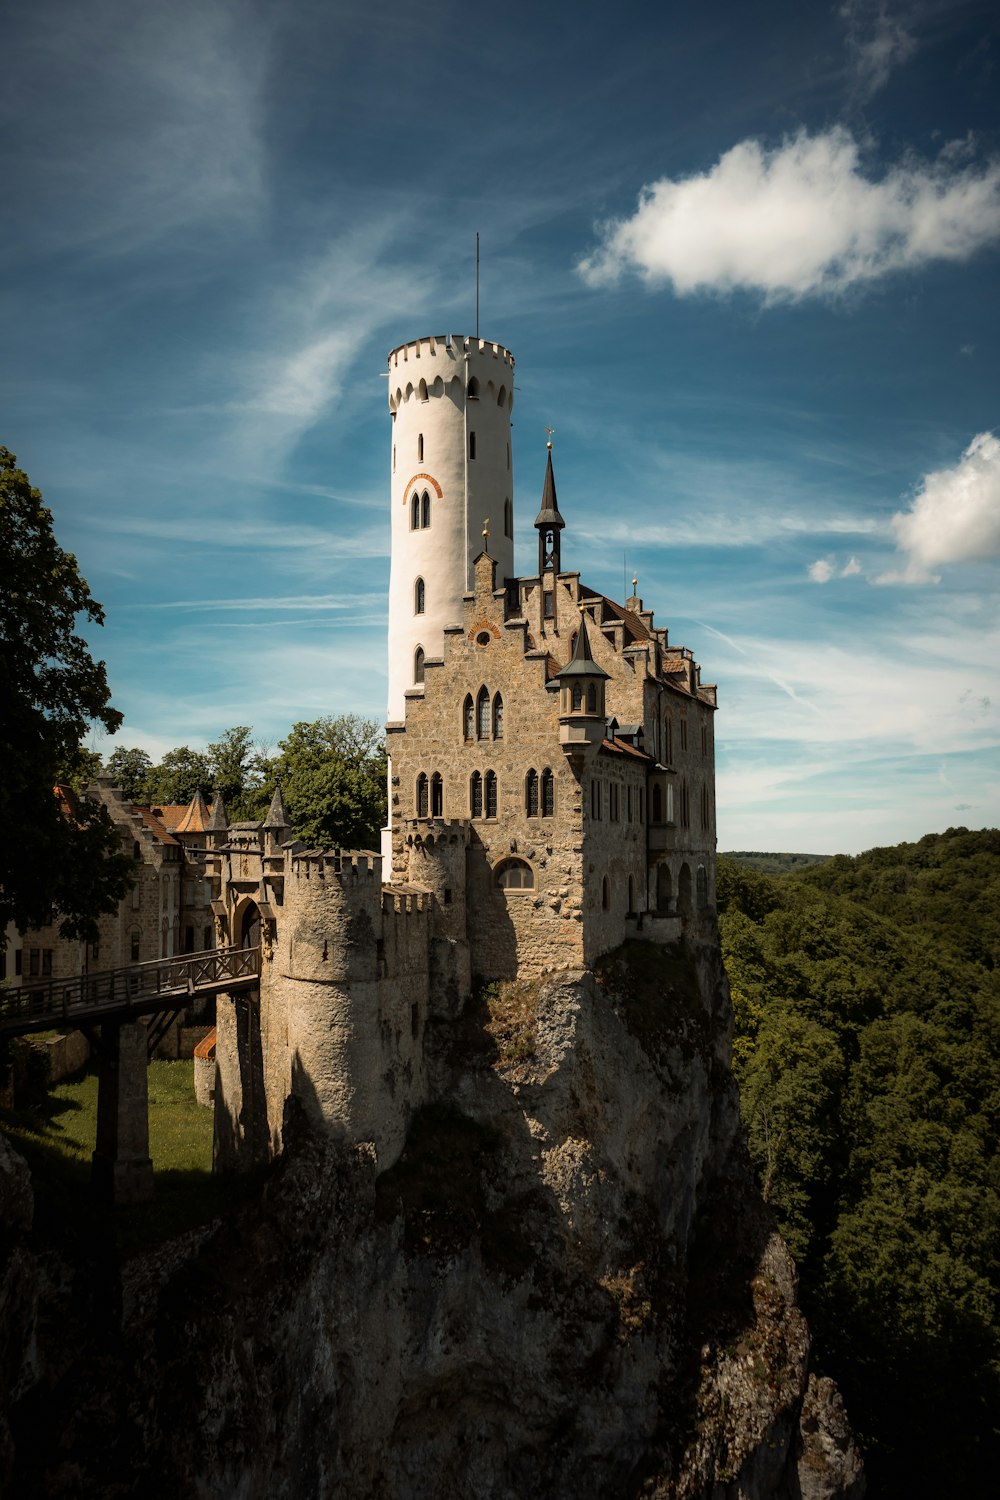 a castle built on top of a cliff